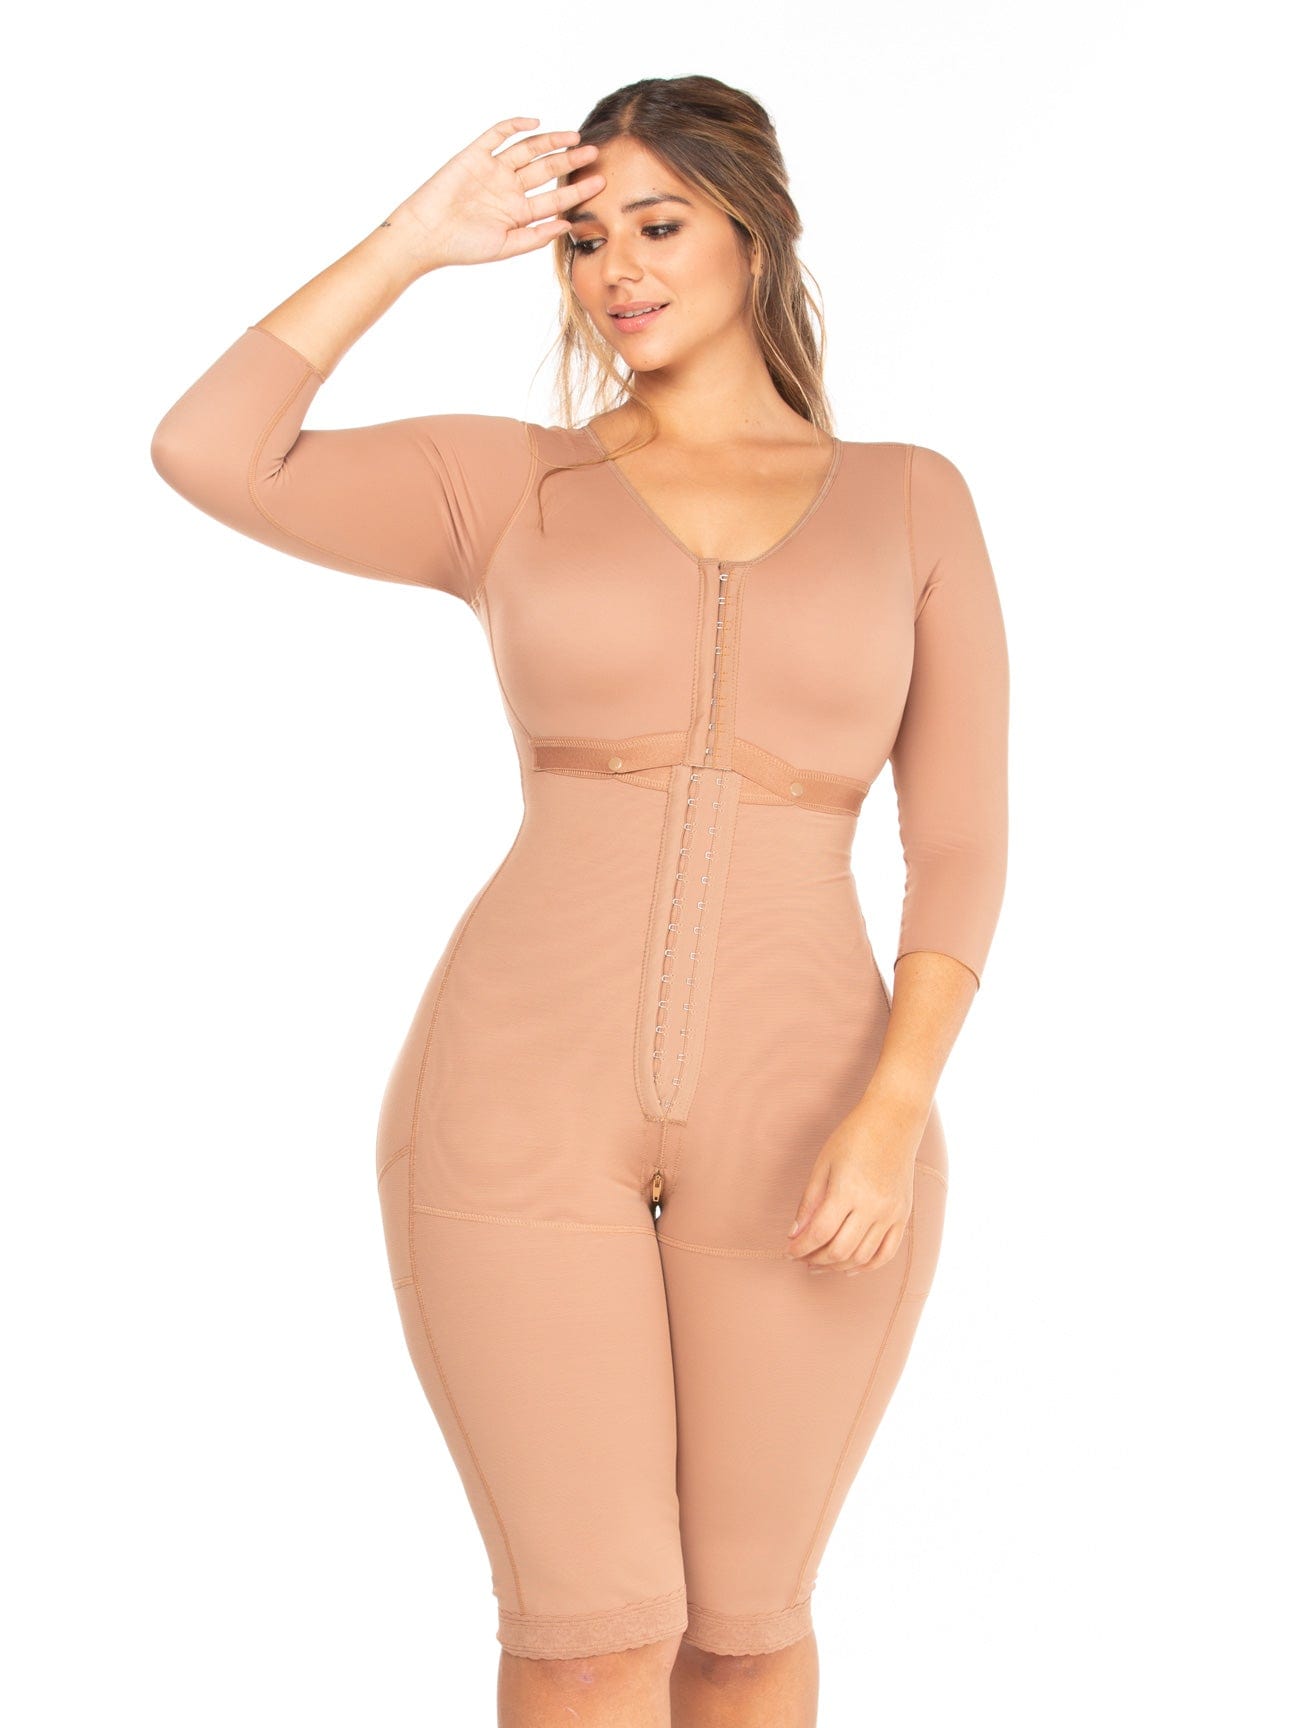 Full body under knee faja with sleeves and hook closure - Contour